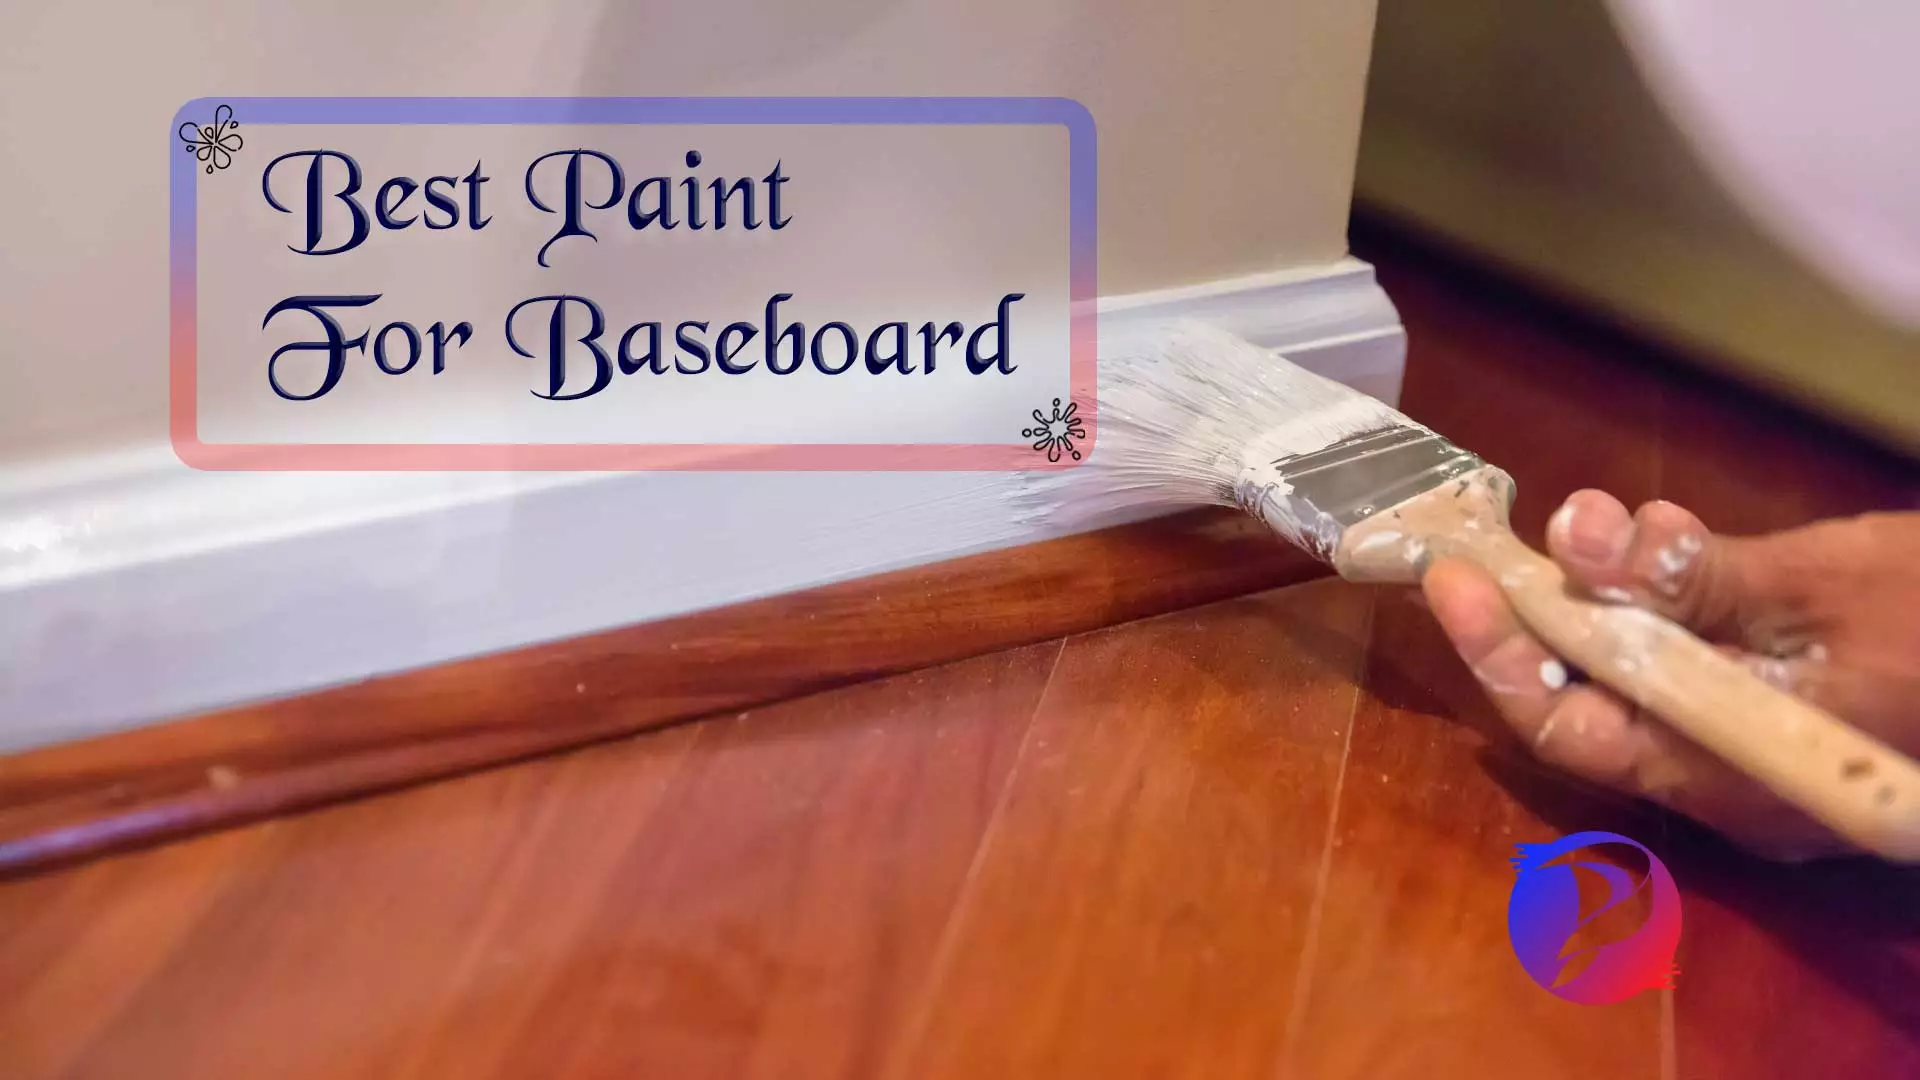 5 Best Paints For Baseboards Reviews, Best Way To Paint Baseboards With Hardwood Floors